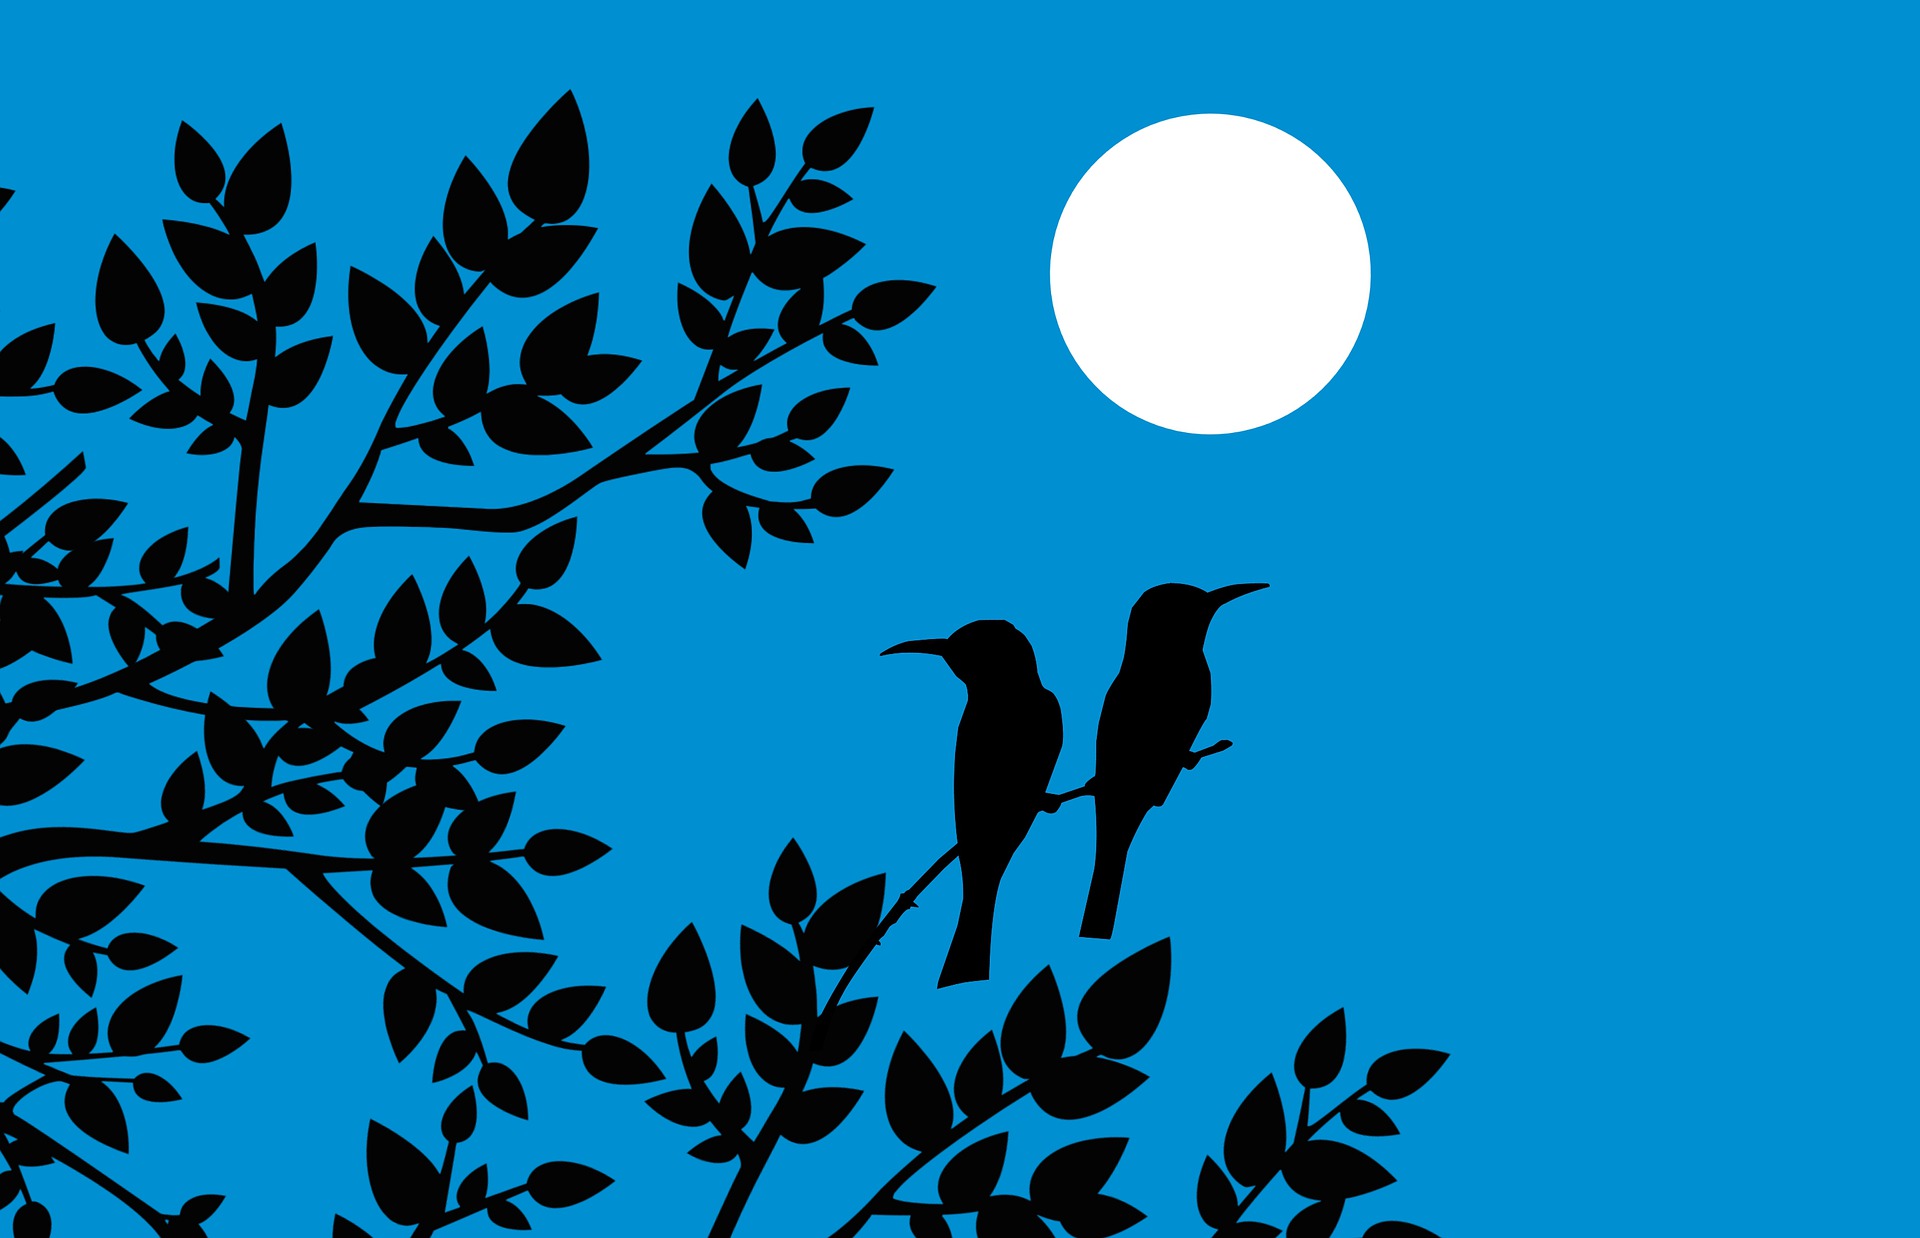 Two birds sit in a tree branch under a full moon